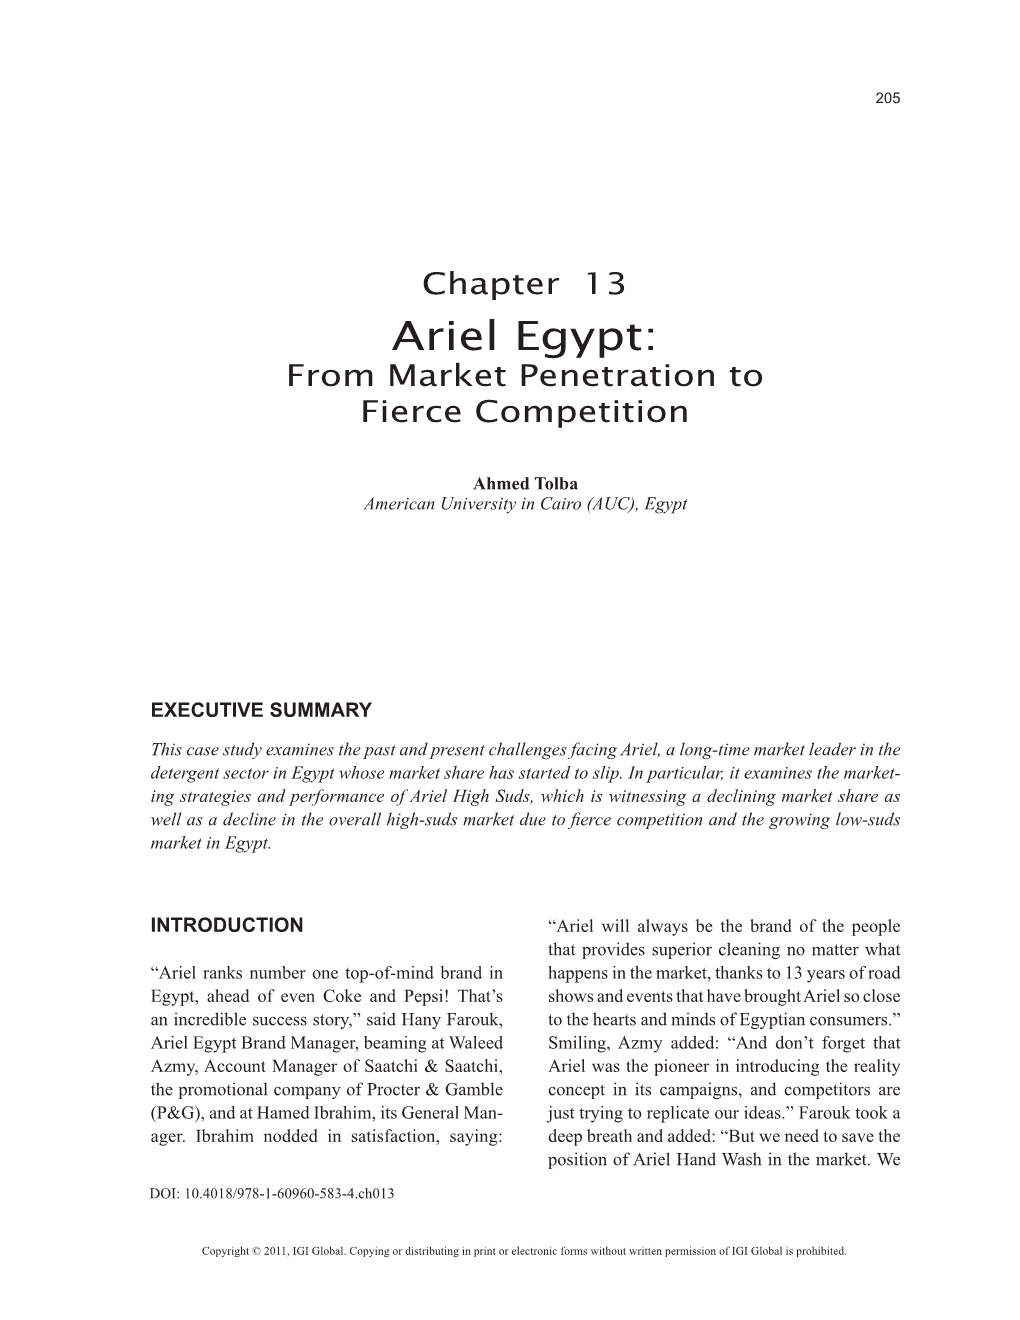 Ariel Egypt: from Market Penetration to Fierce Competition